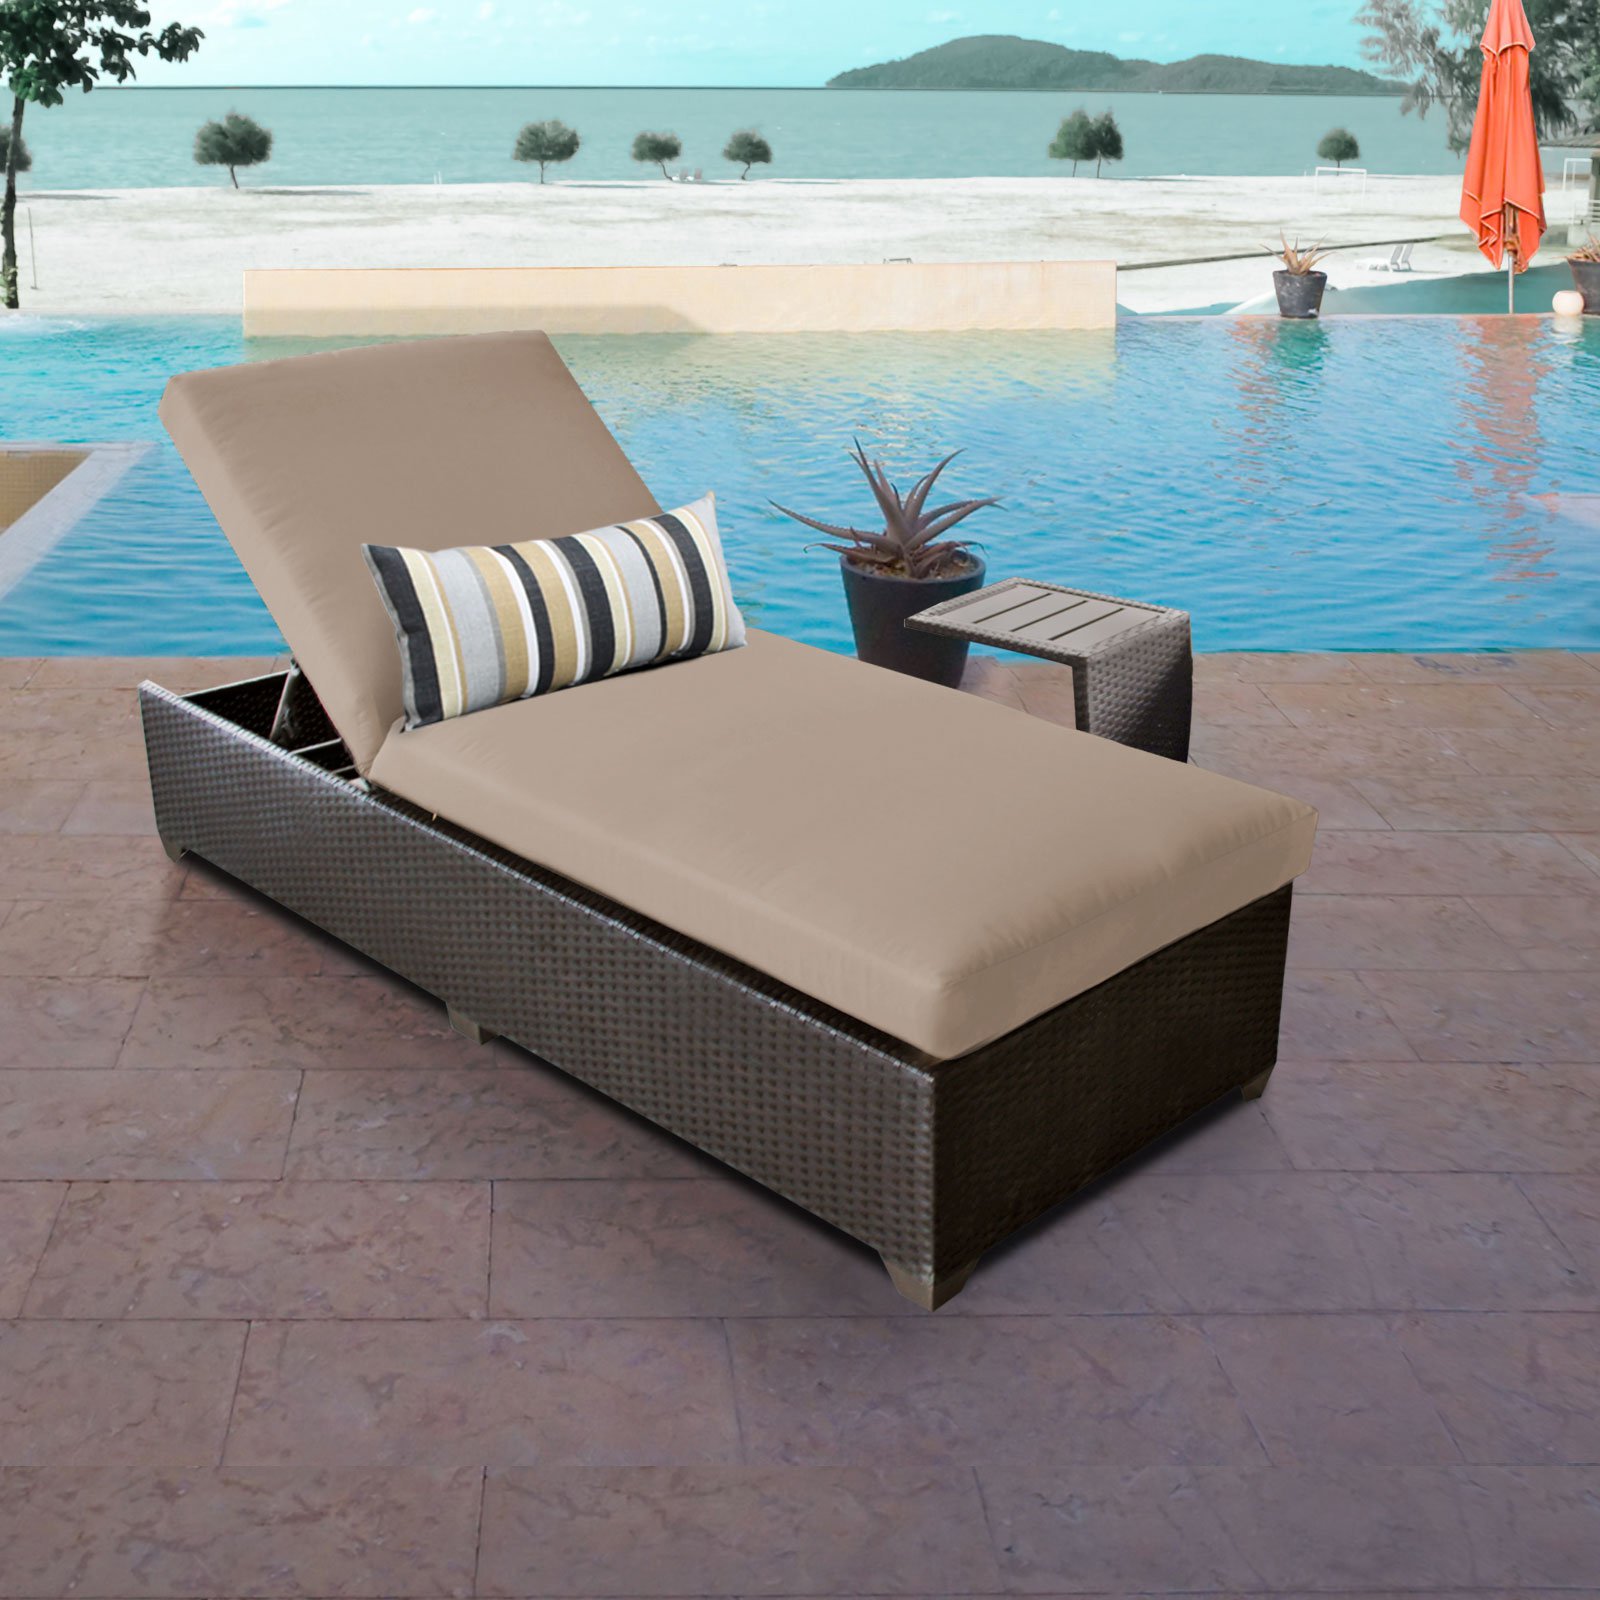 Barbados Chaise Wicker Patio Furniture with Side Table in Terracotta (Set of 2) - image 5 of 10